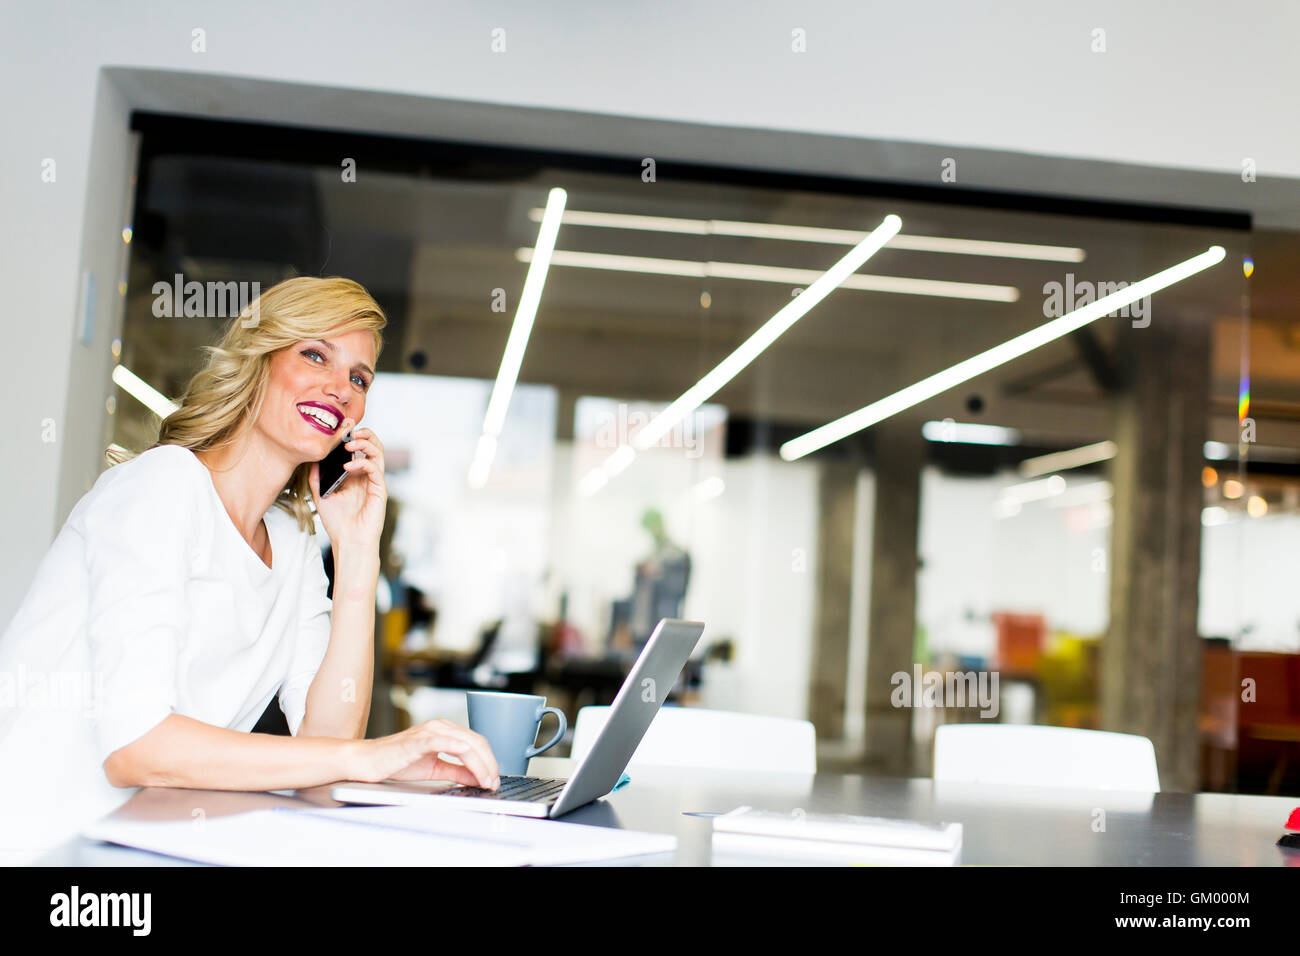 Young manageress working at her desk in the office taking a call on her mobile phone Stock Photo